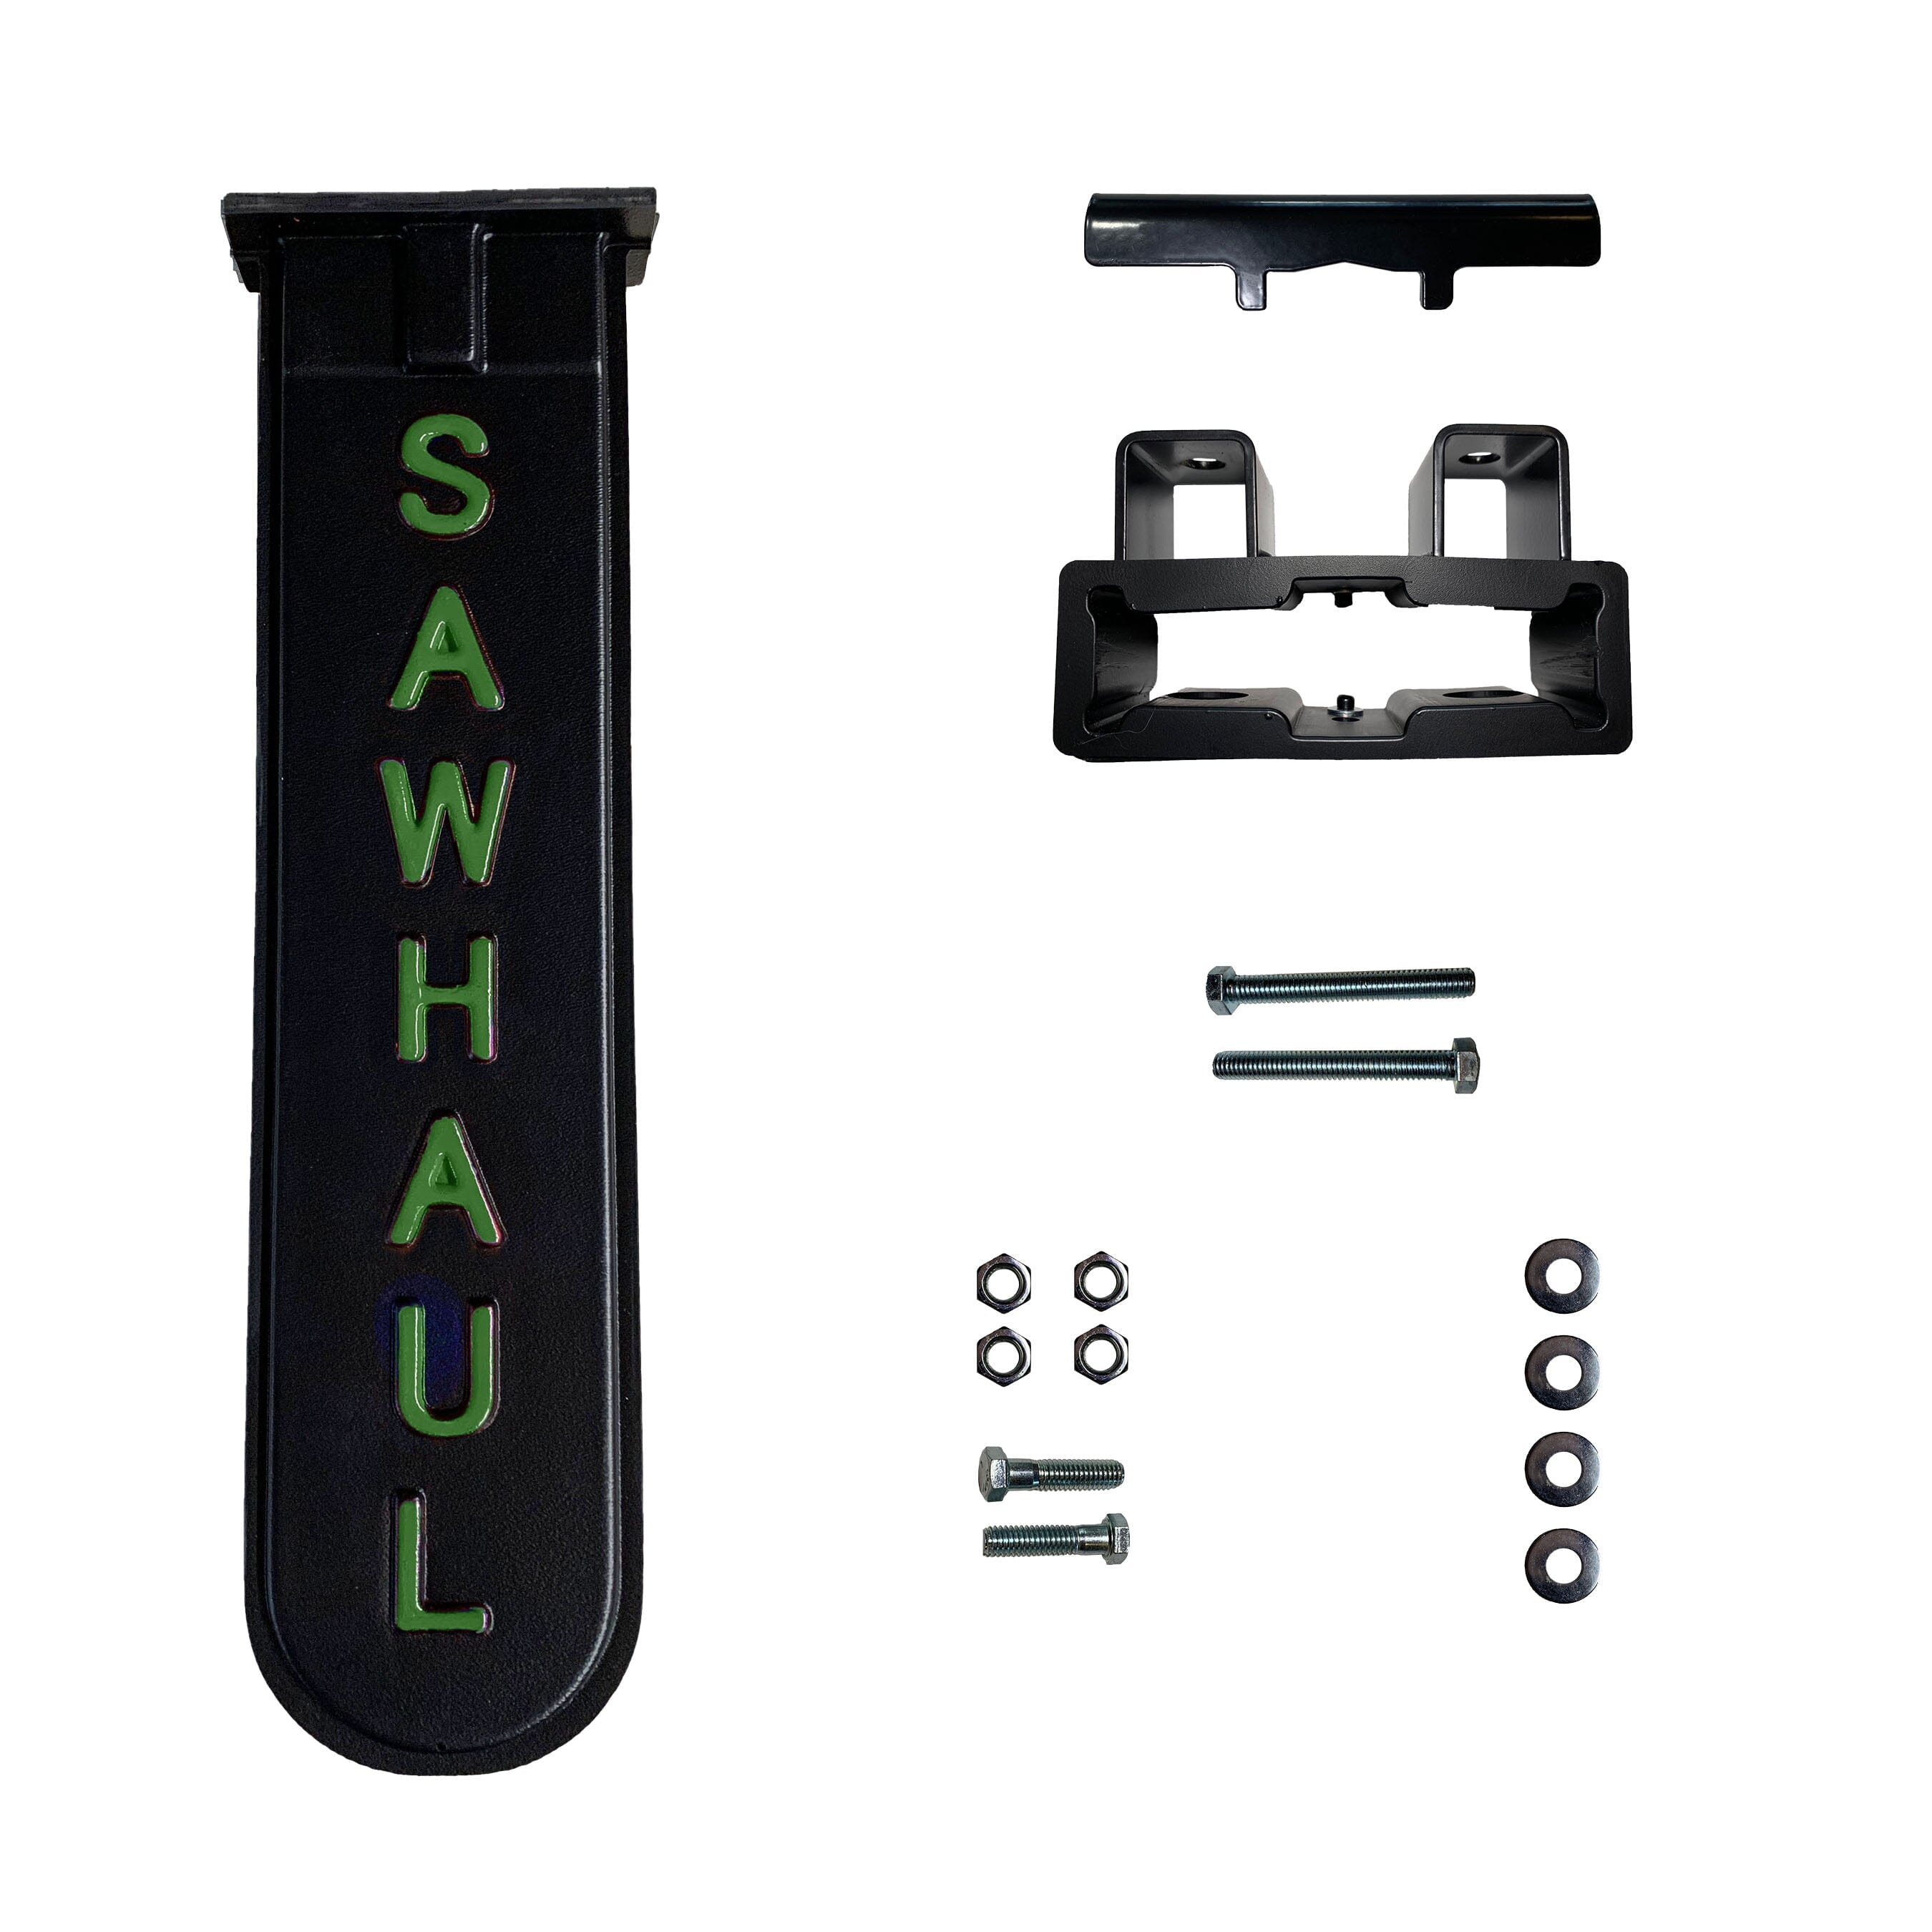 SawHaul Complete Kit for ROPS & Man Lifts Complete Kit SawHaul 20